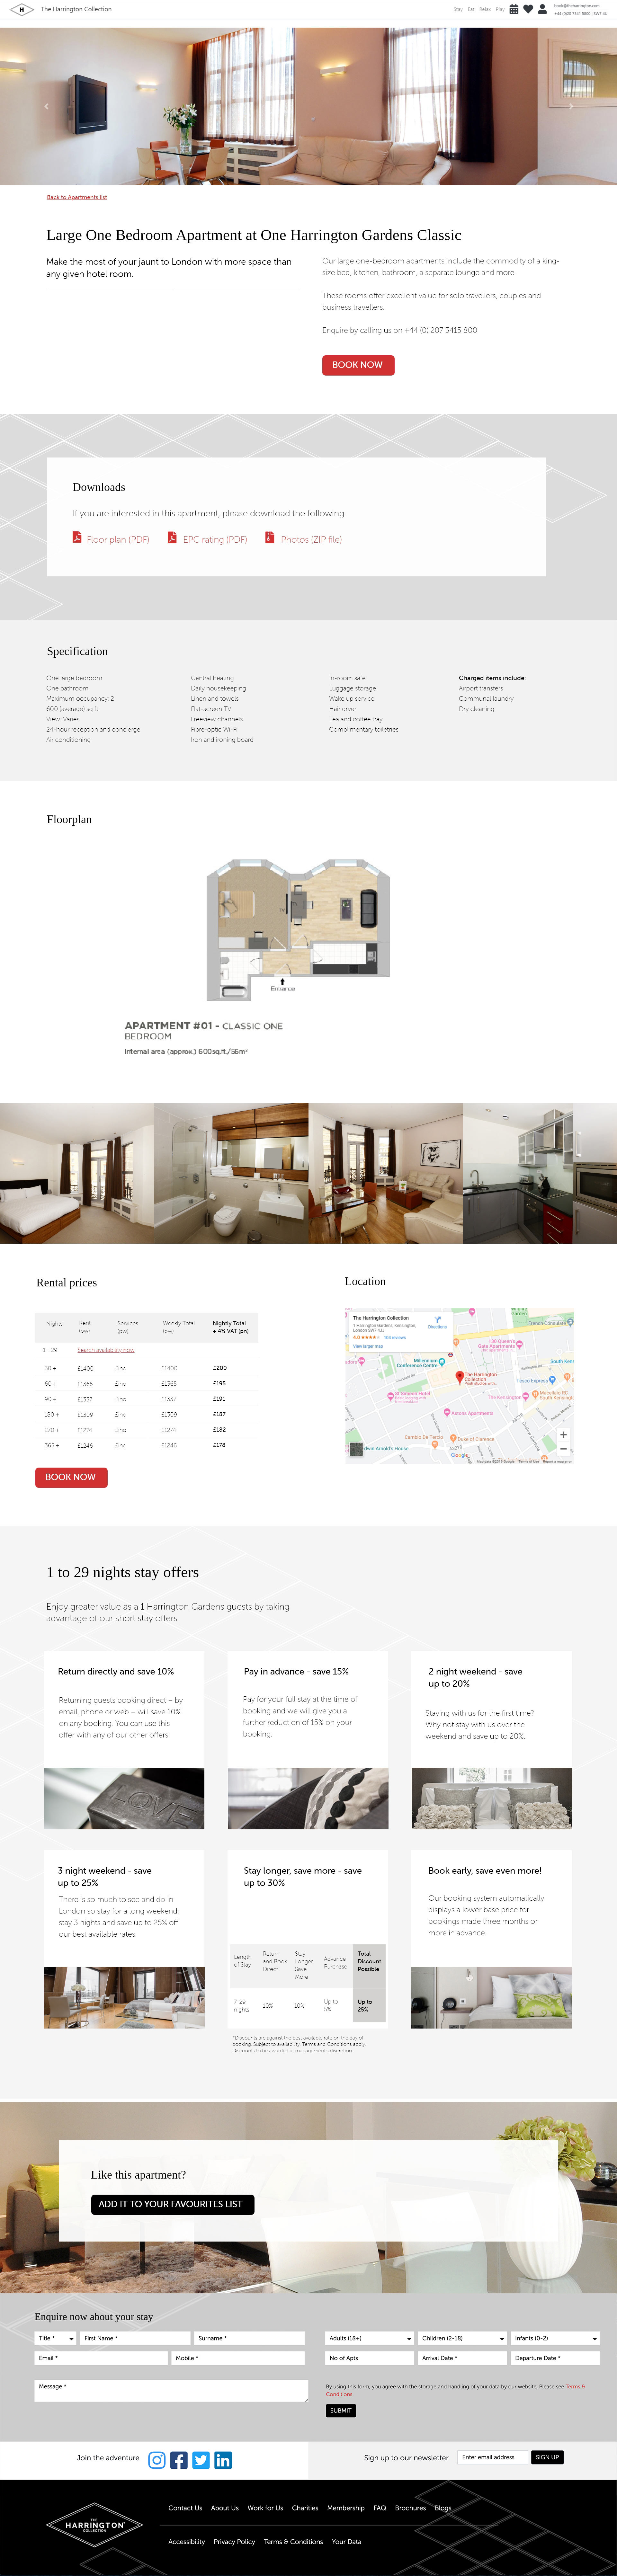 Apartment page